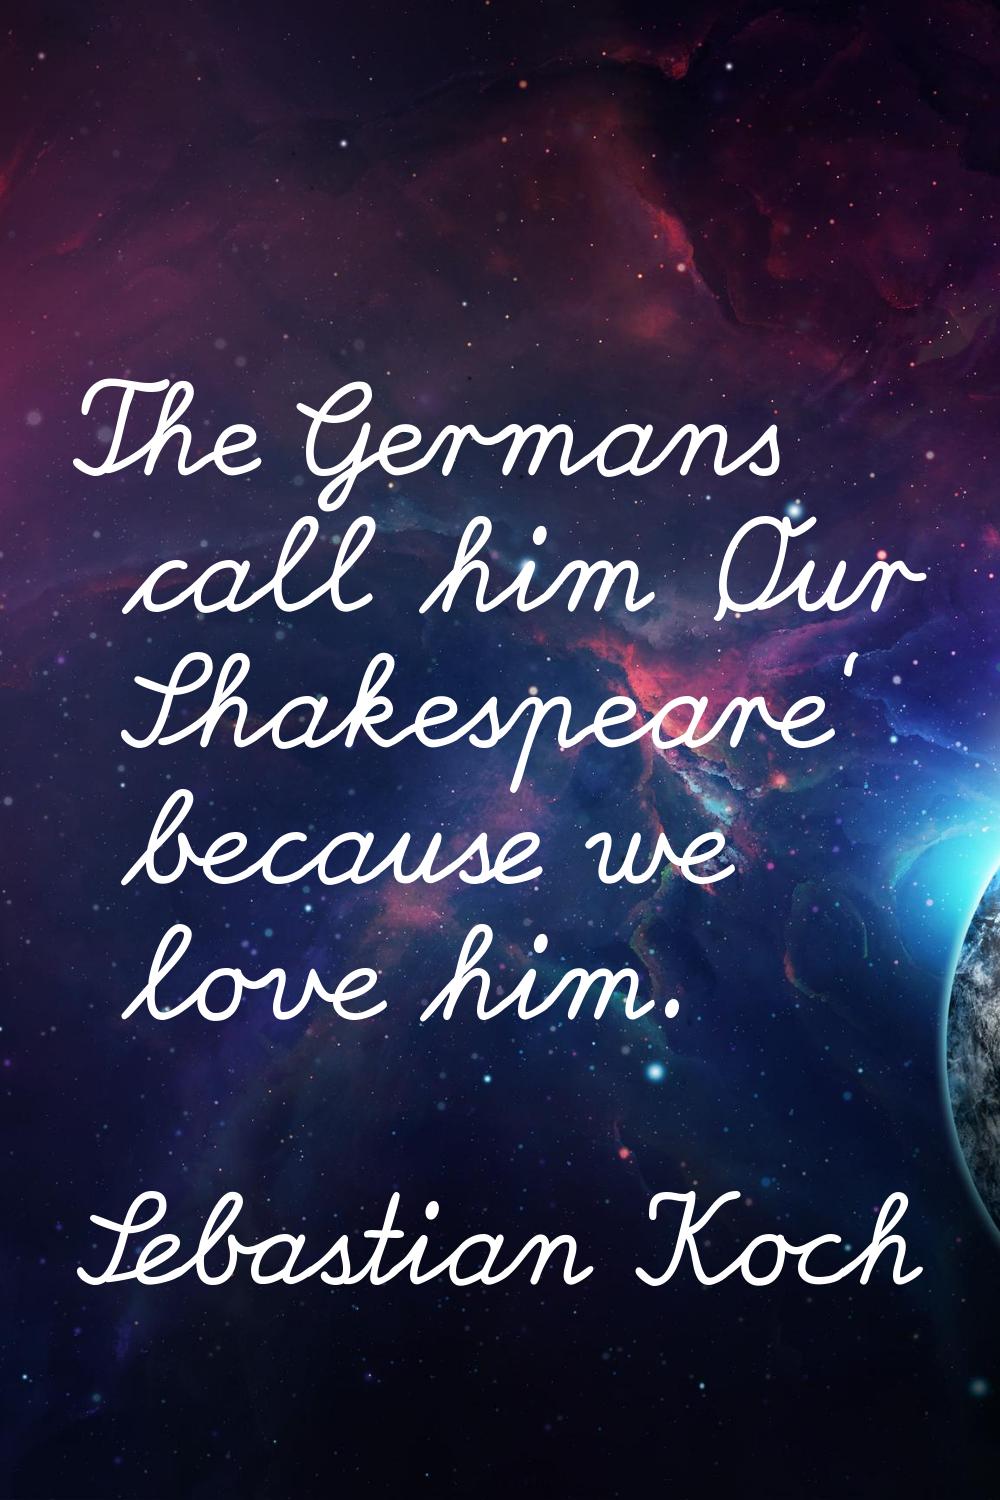 The Germans call him 'Our Shakespeare' because we love him.